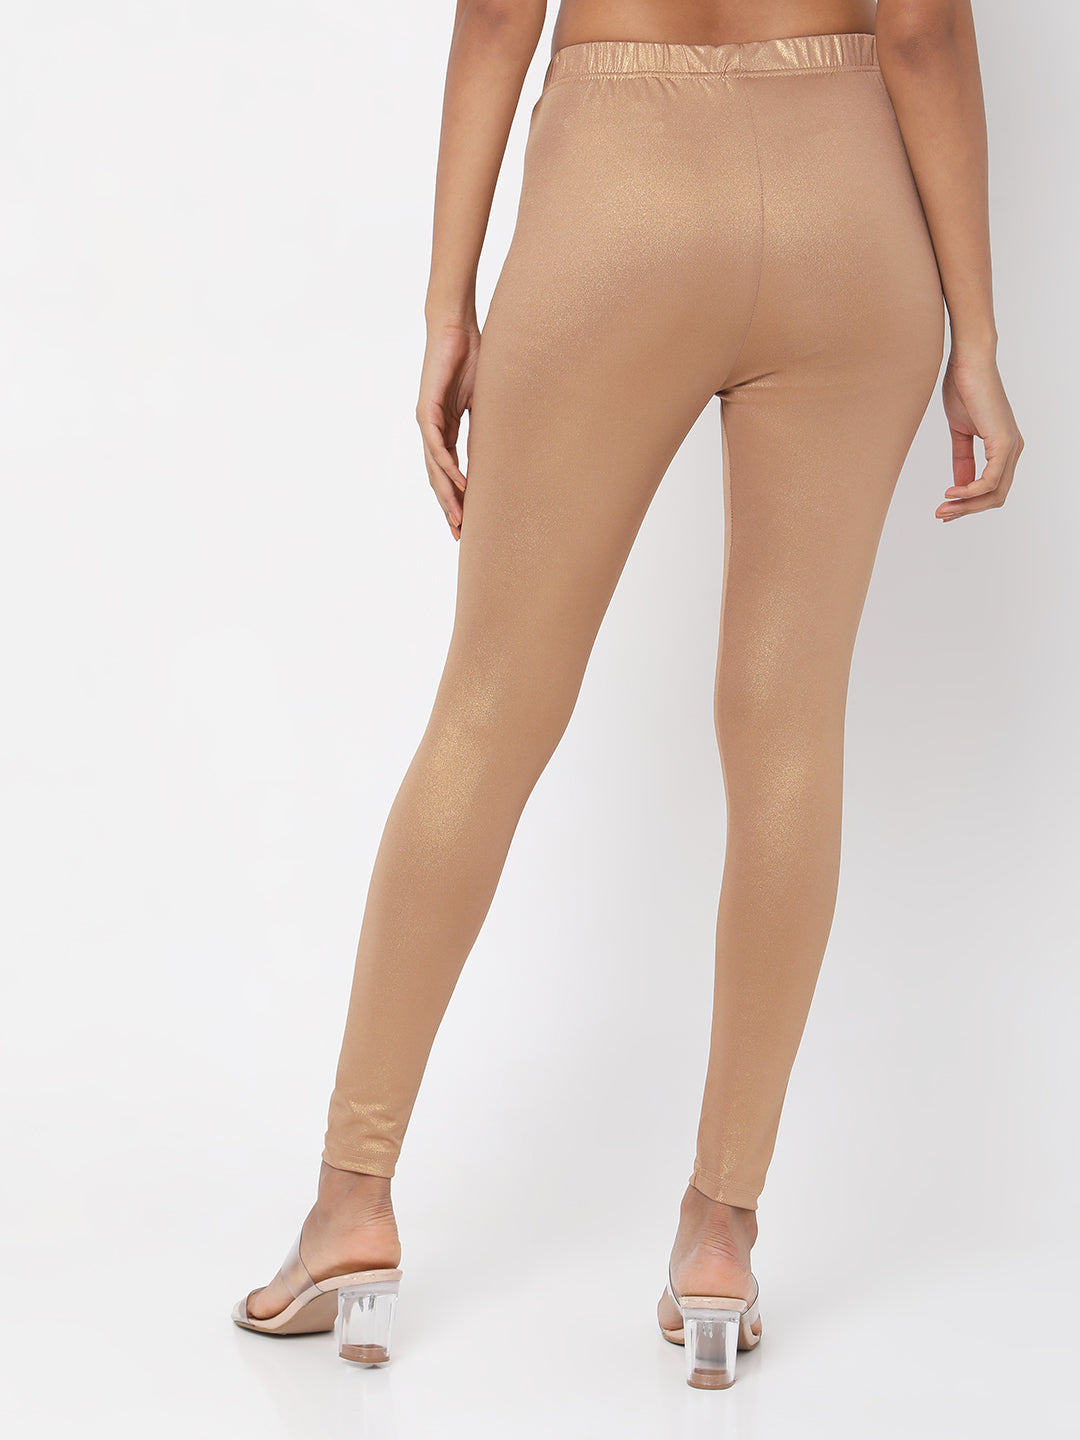 Women's Beige Polyester Spandex Solid Leggings - Ethnicity India